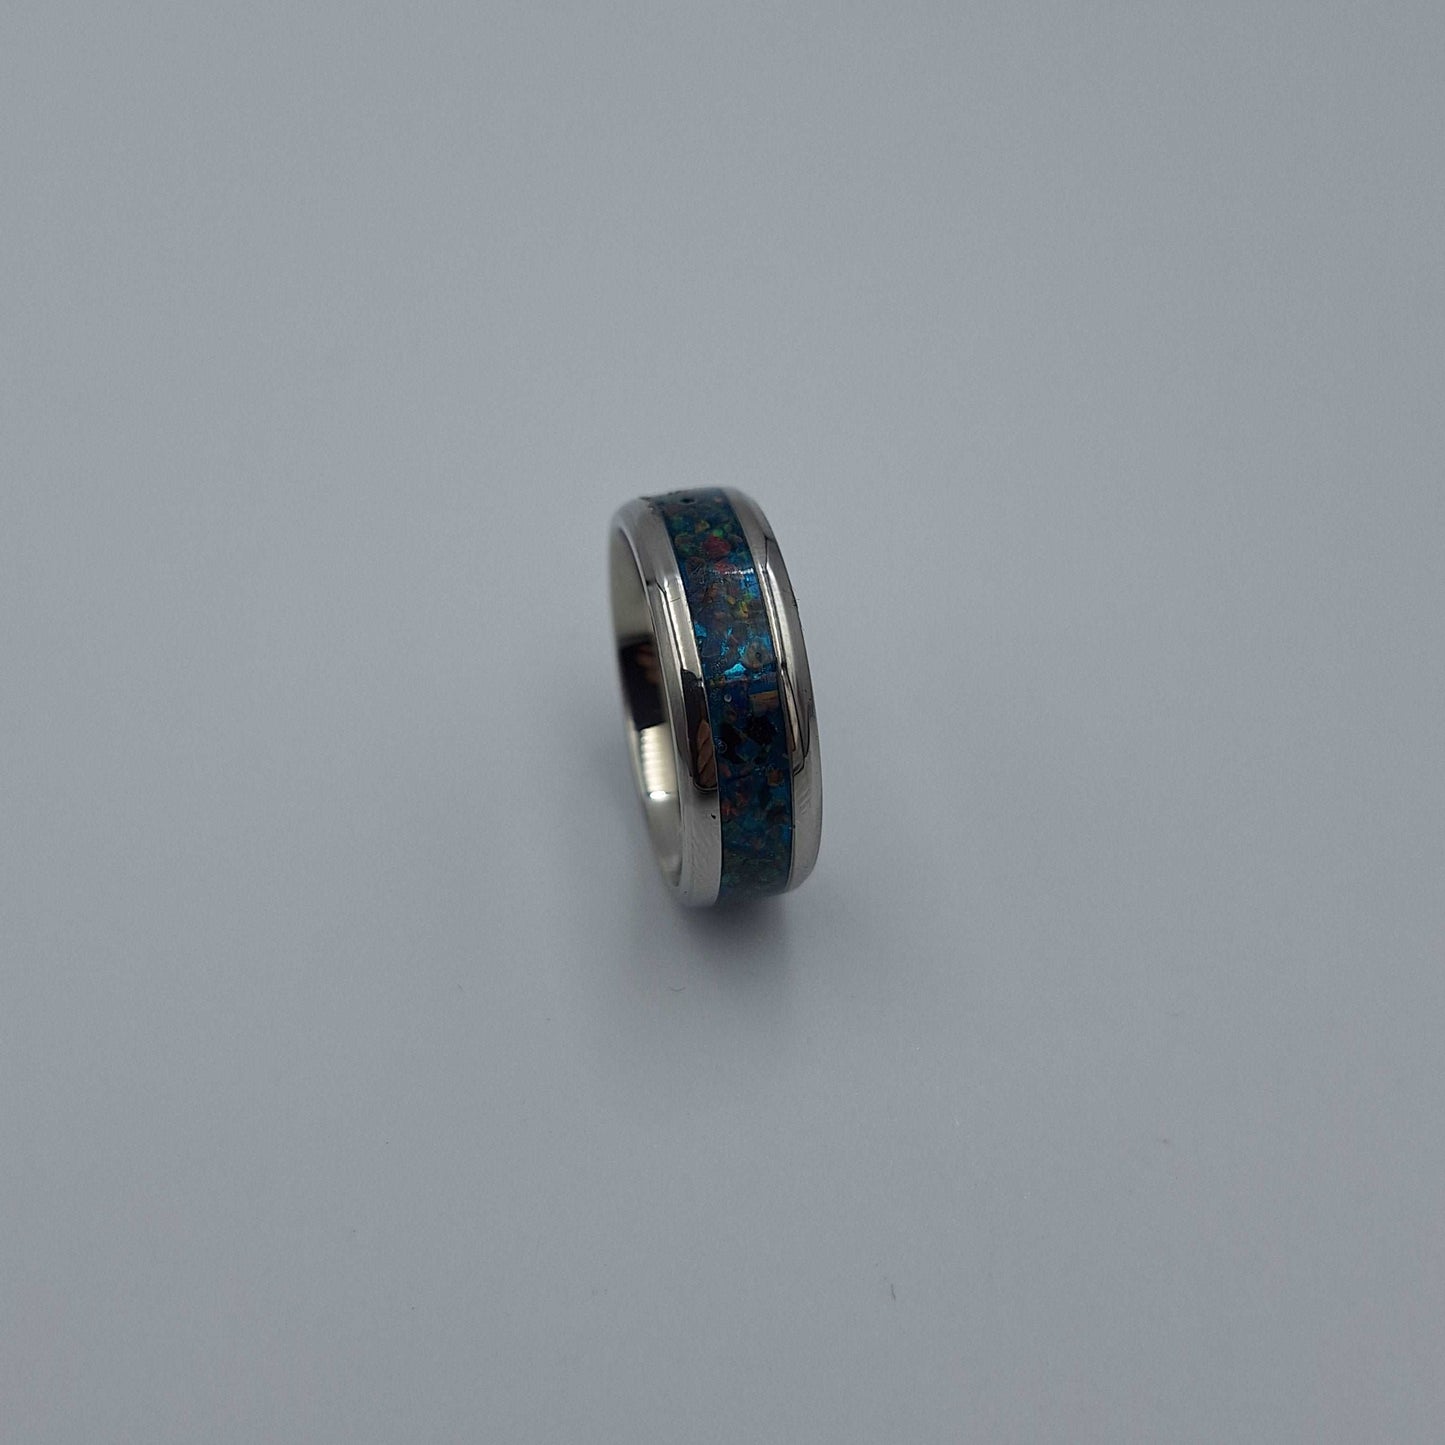 Stainless Steel 8mm Ring With Crushed Opals - Size 11